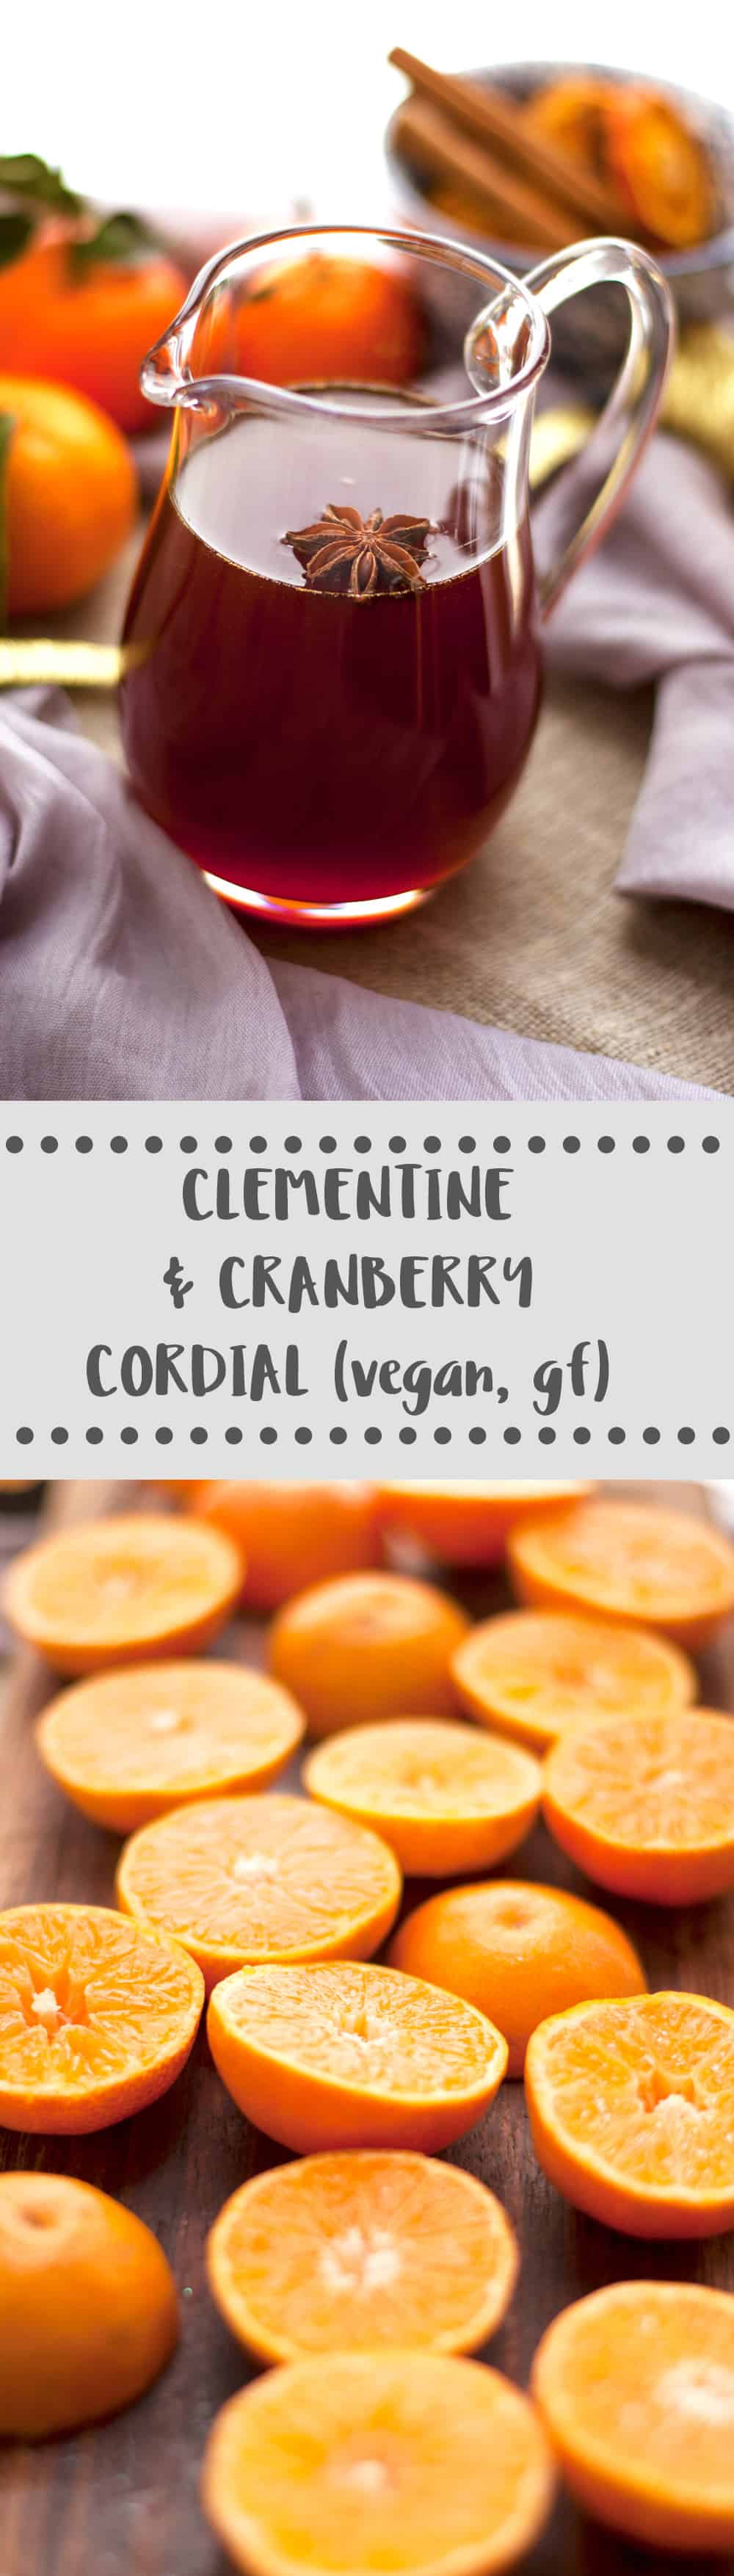 Clementine and Cranberry cordial. Ideal for mocktails and cocktails or with a cup of hot tea! | via @annabanana.co